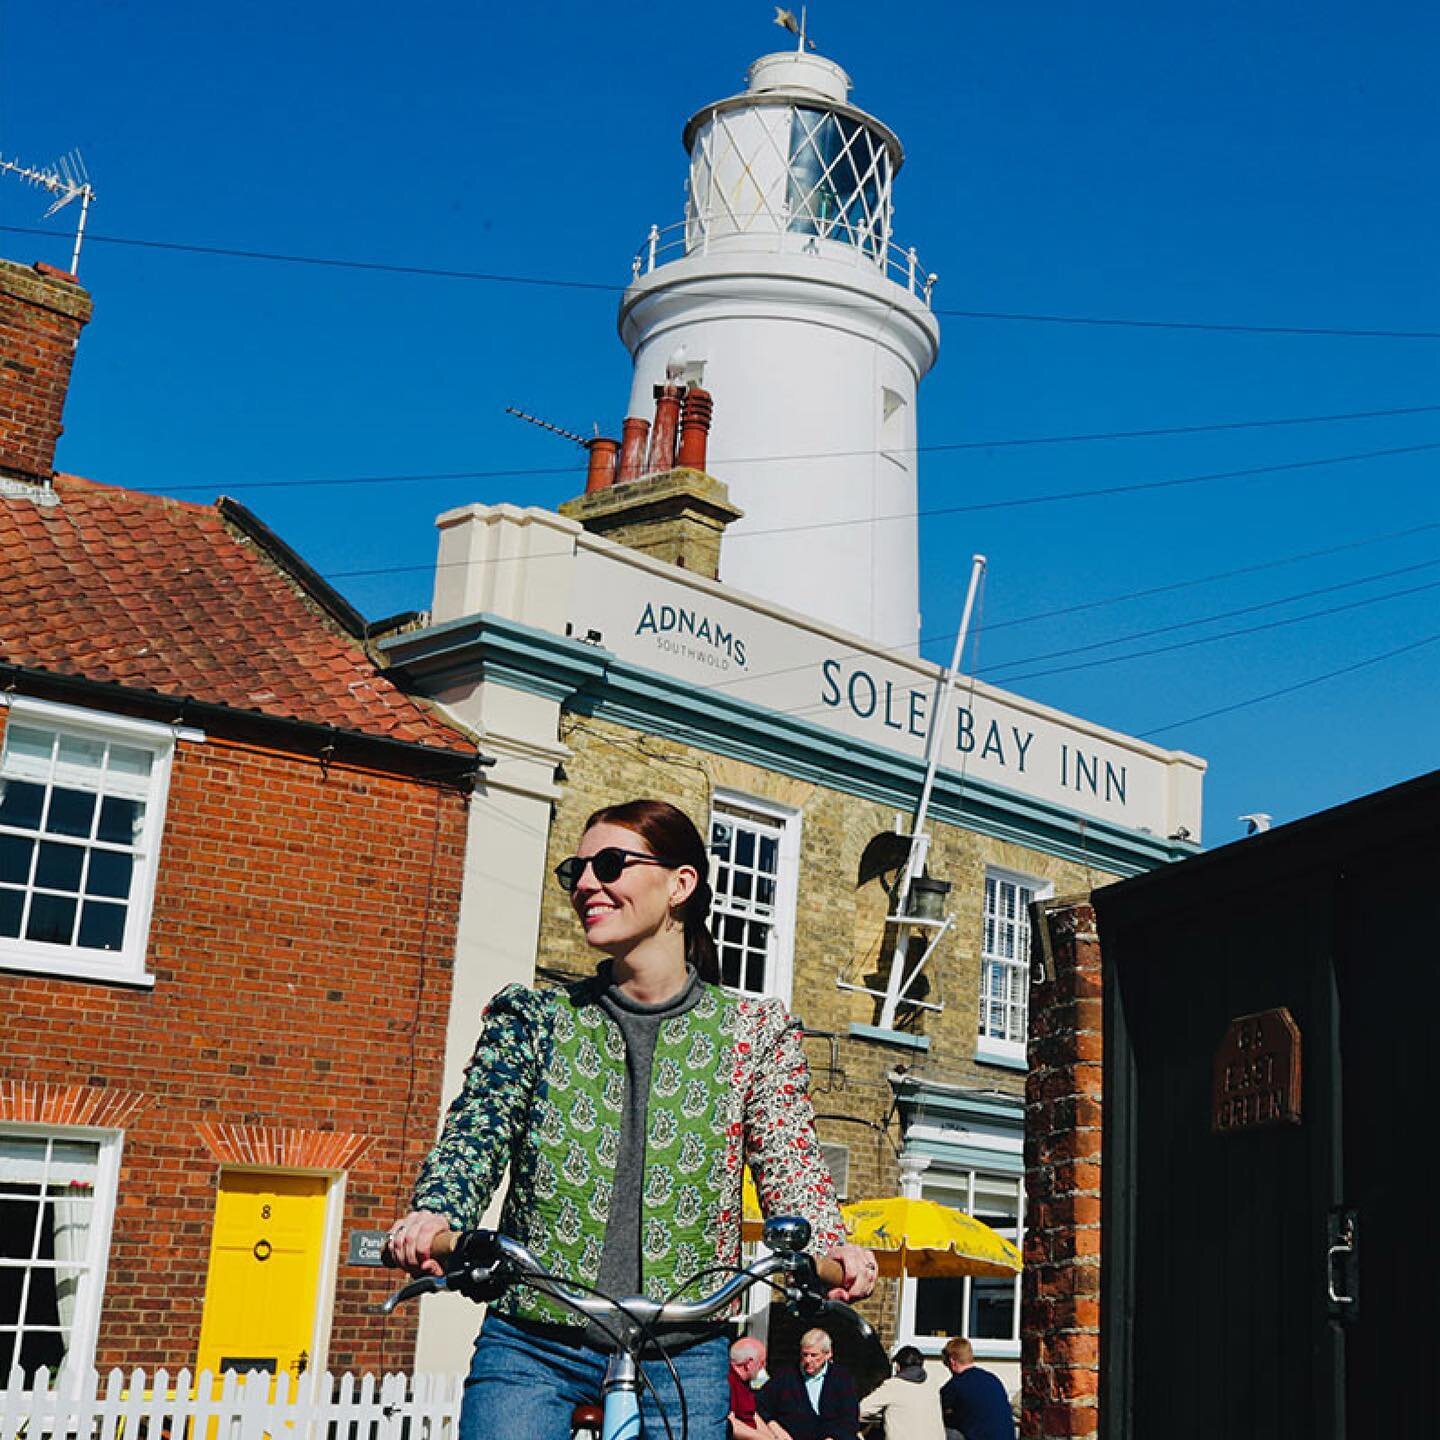 Cycling, sun and the Sole Bay Inn? Yes please! 

Photo by @rosielitterick 

#solebayinn #cyclingsouthwold #summersouthwold #southwoldlife